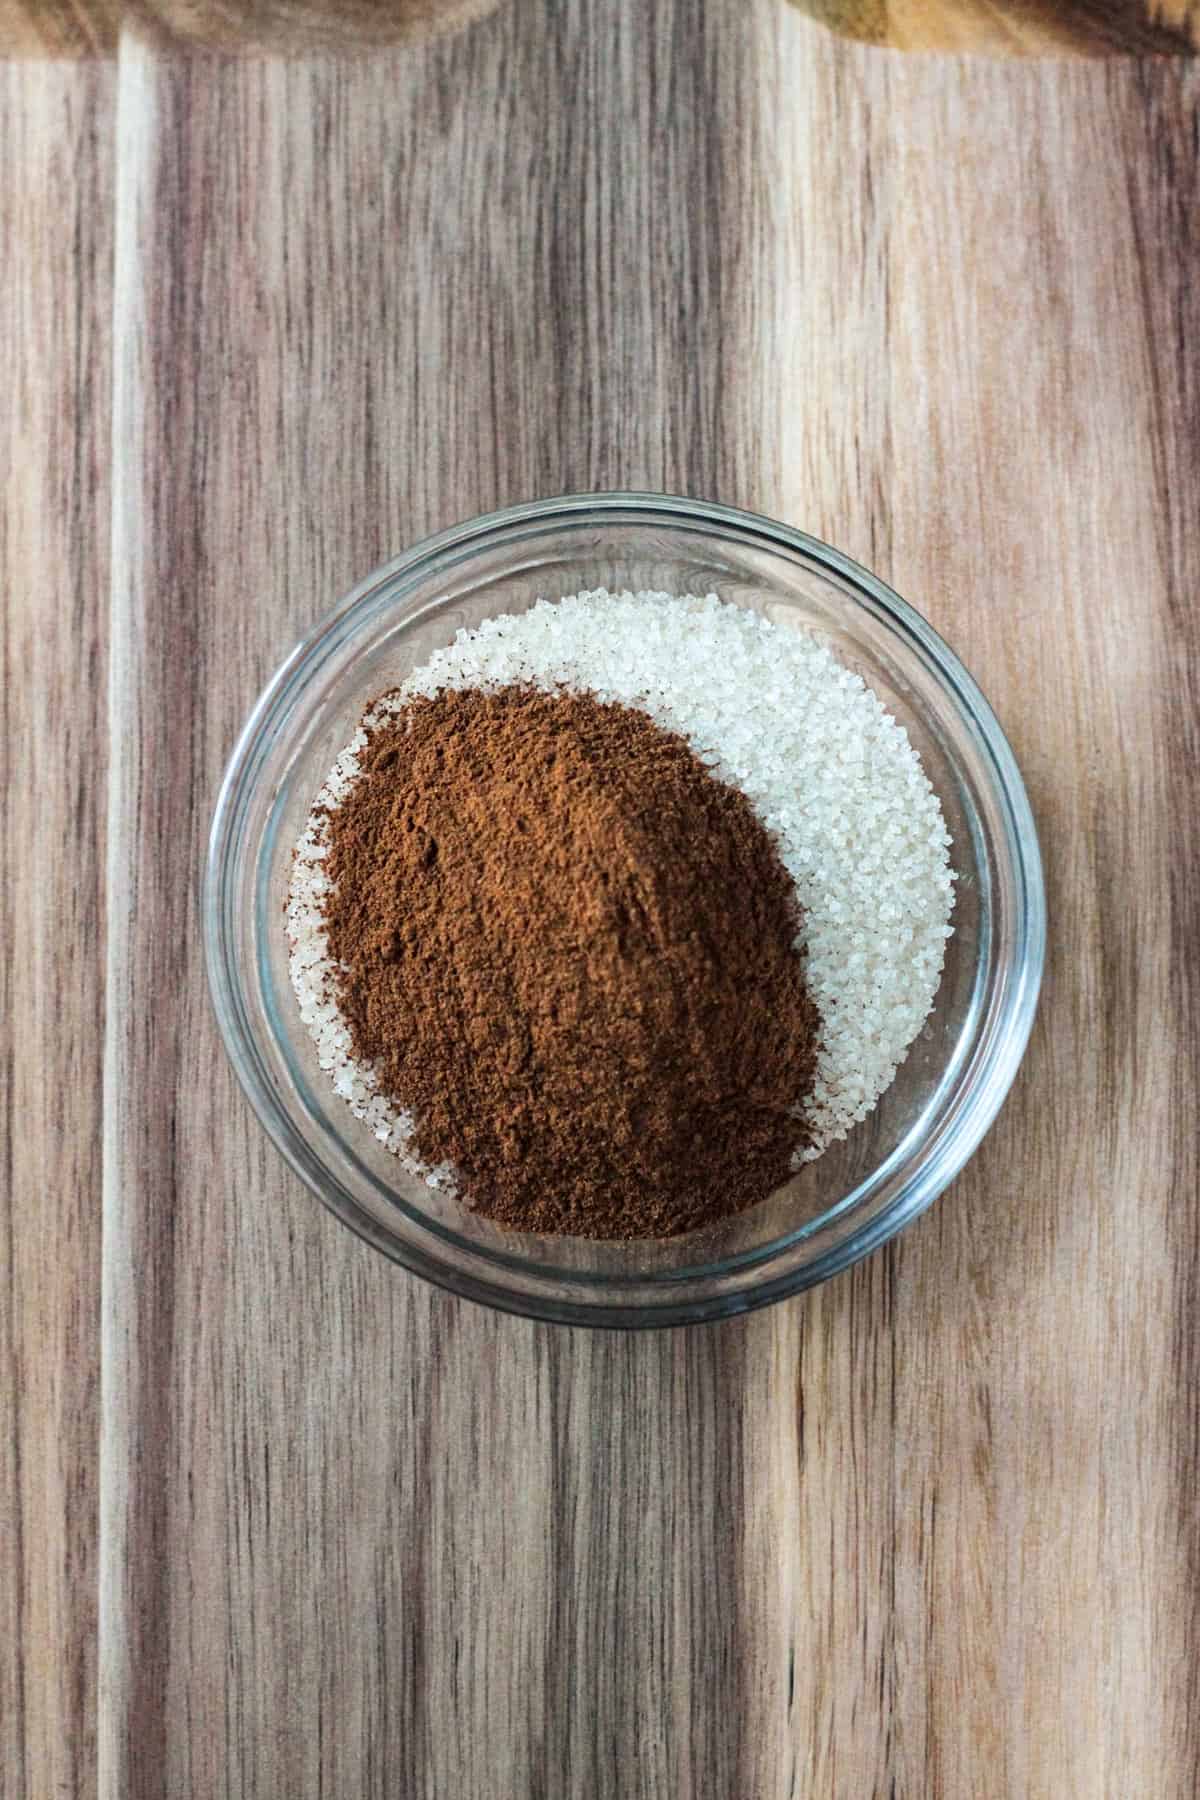 Ground cinnamon and sugar in a bowl.